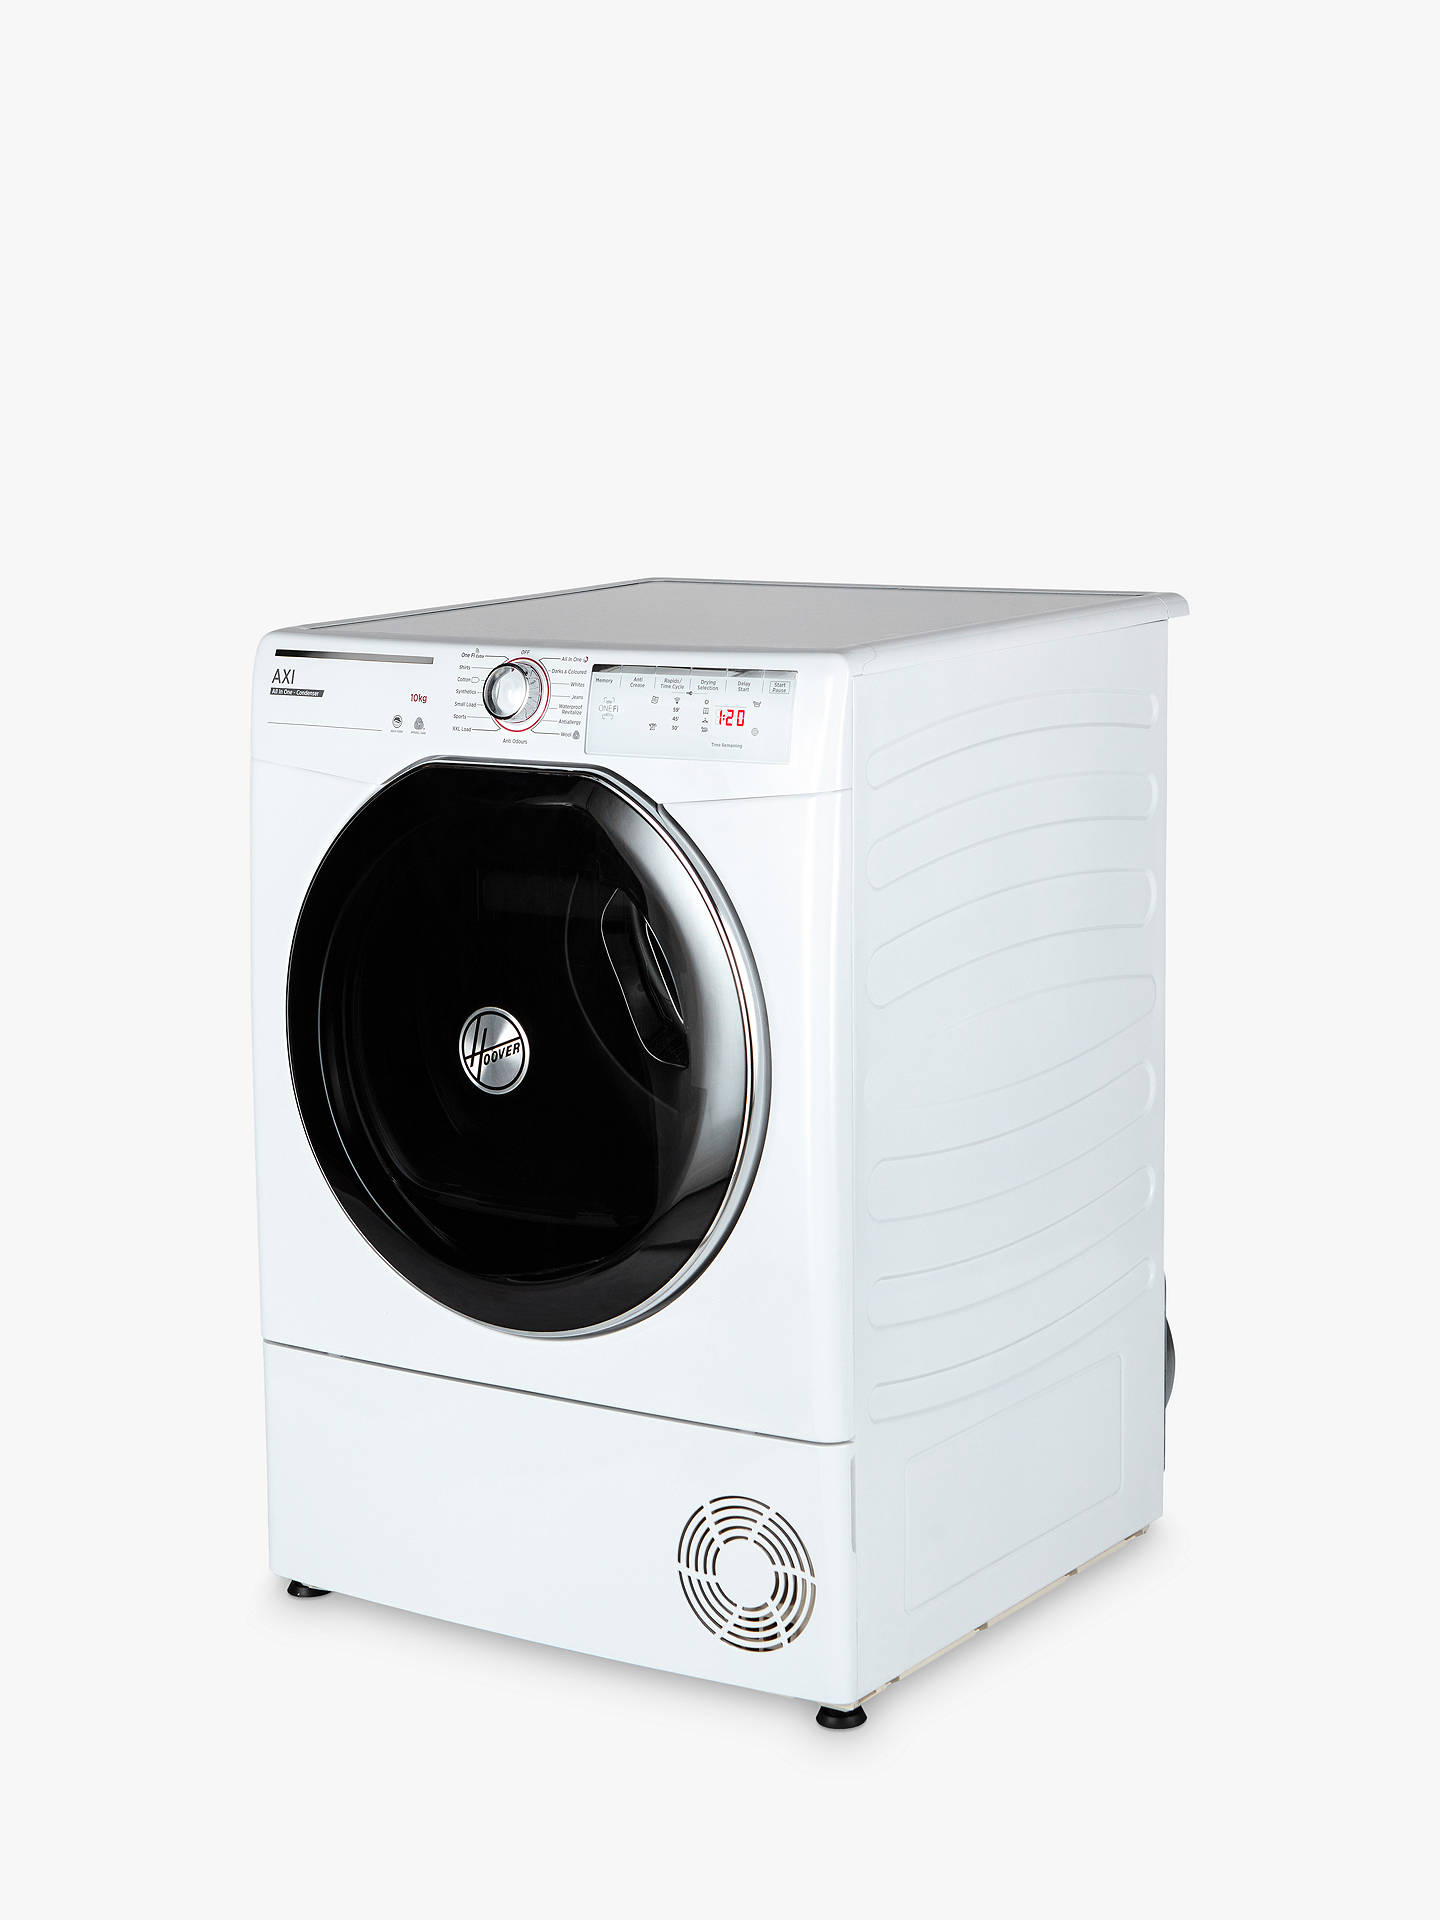 10kg Load Hoover AXI ATDC10TKEX Freestanding Condensor Tumble Dryer White WiFi Connected